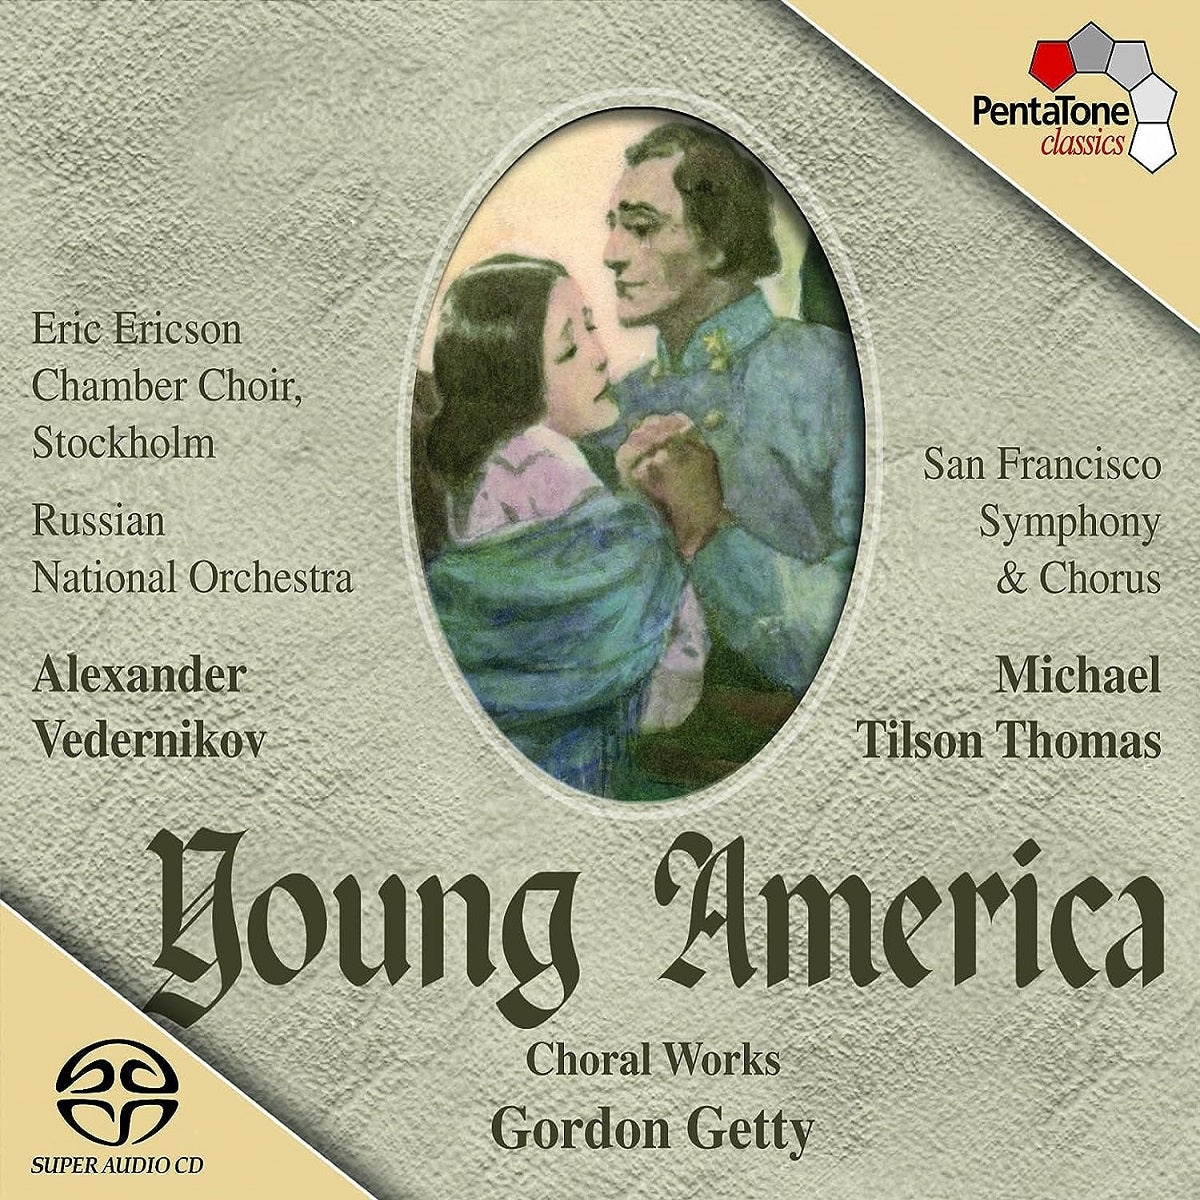 Young America - Getty: Choral Works